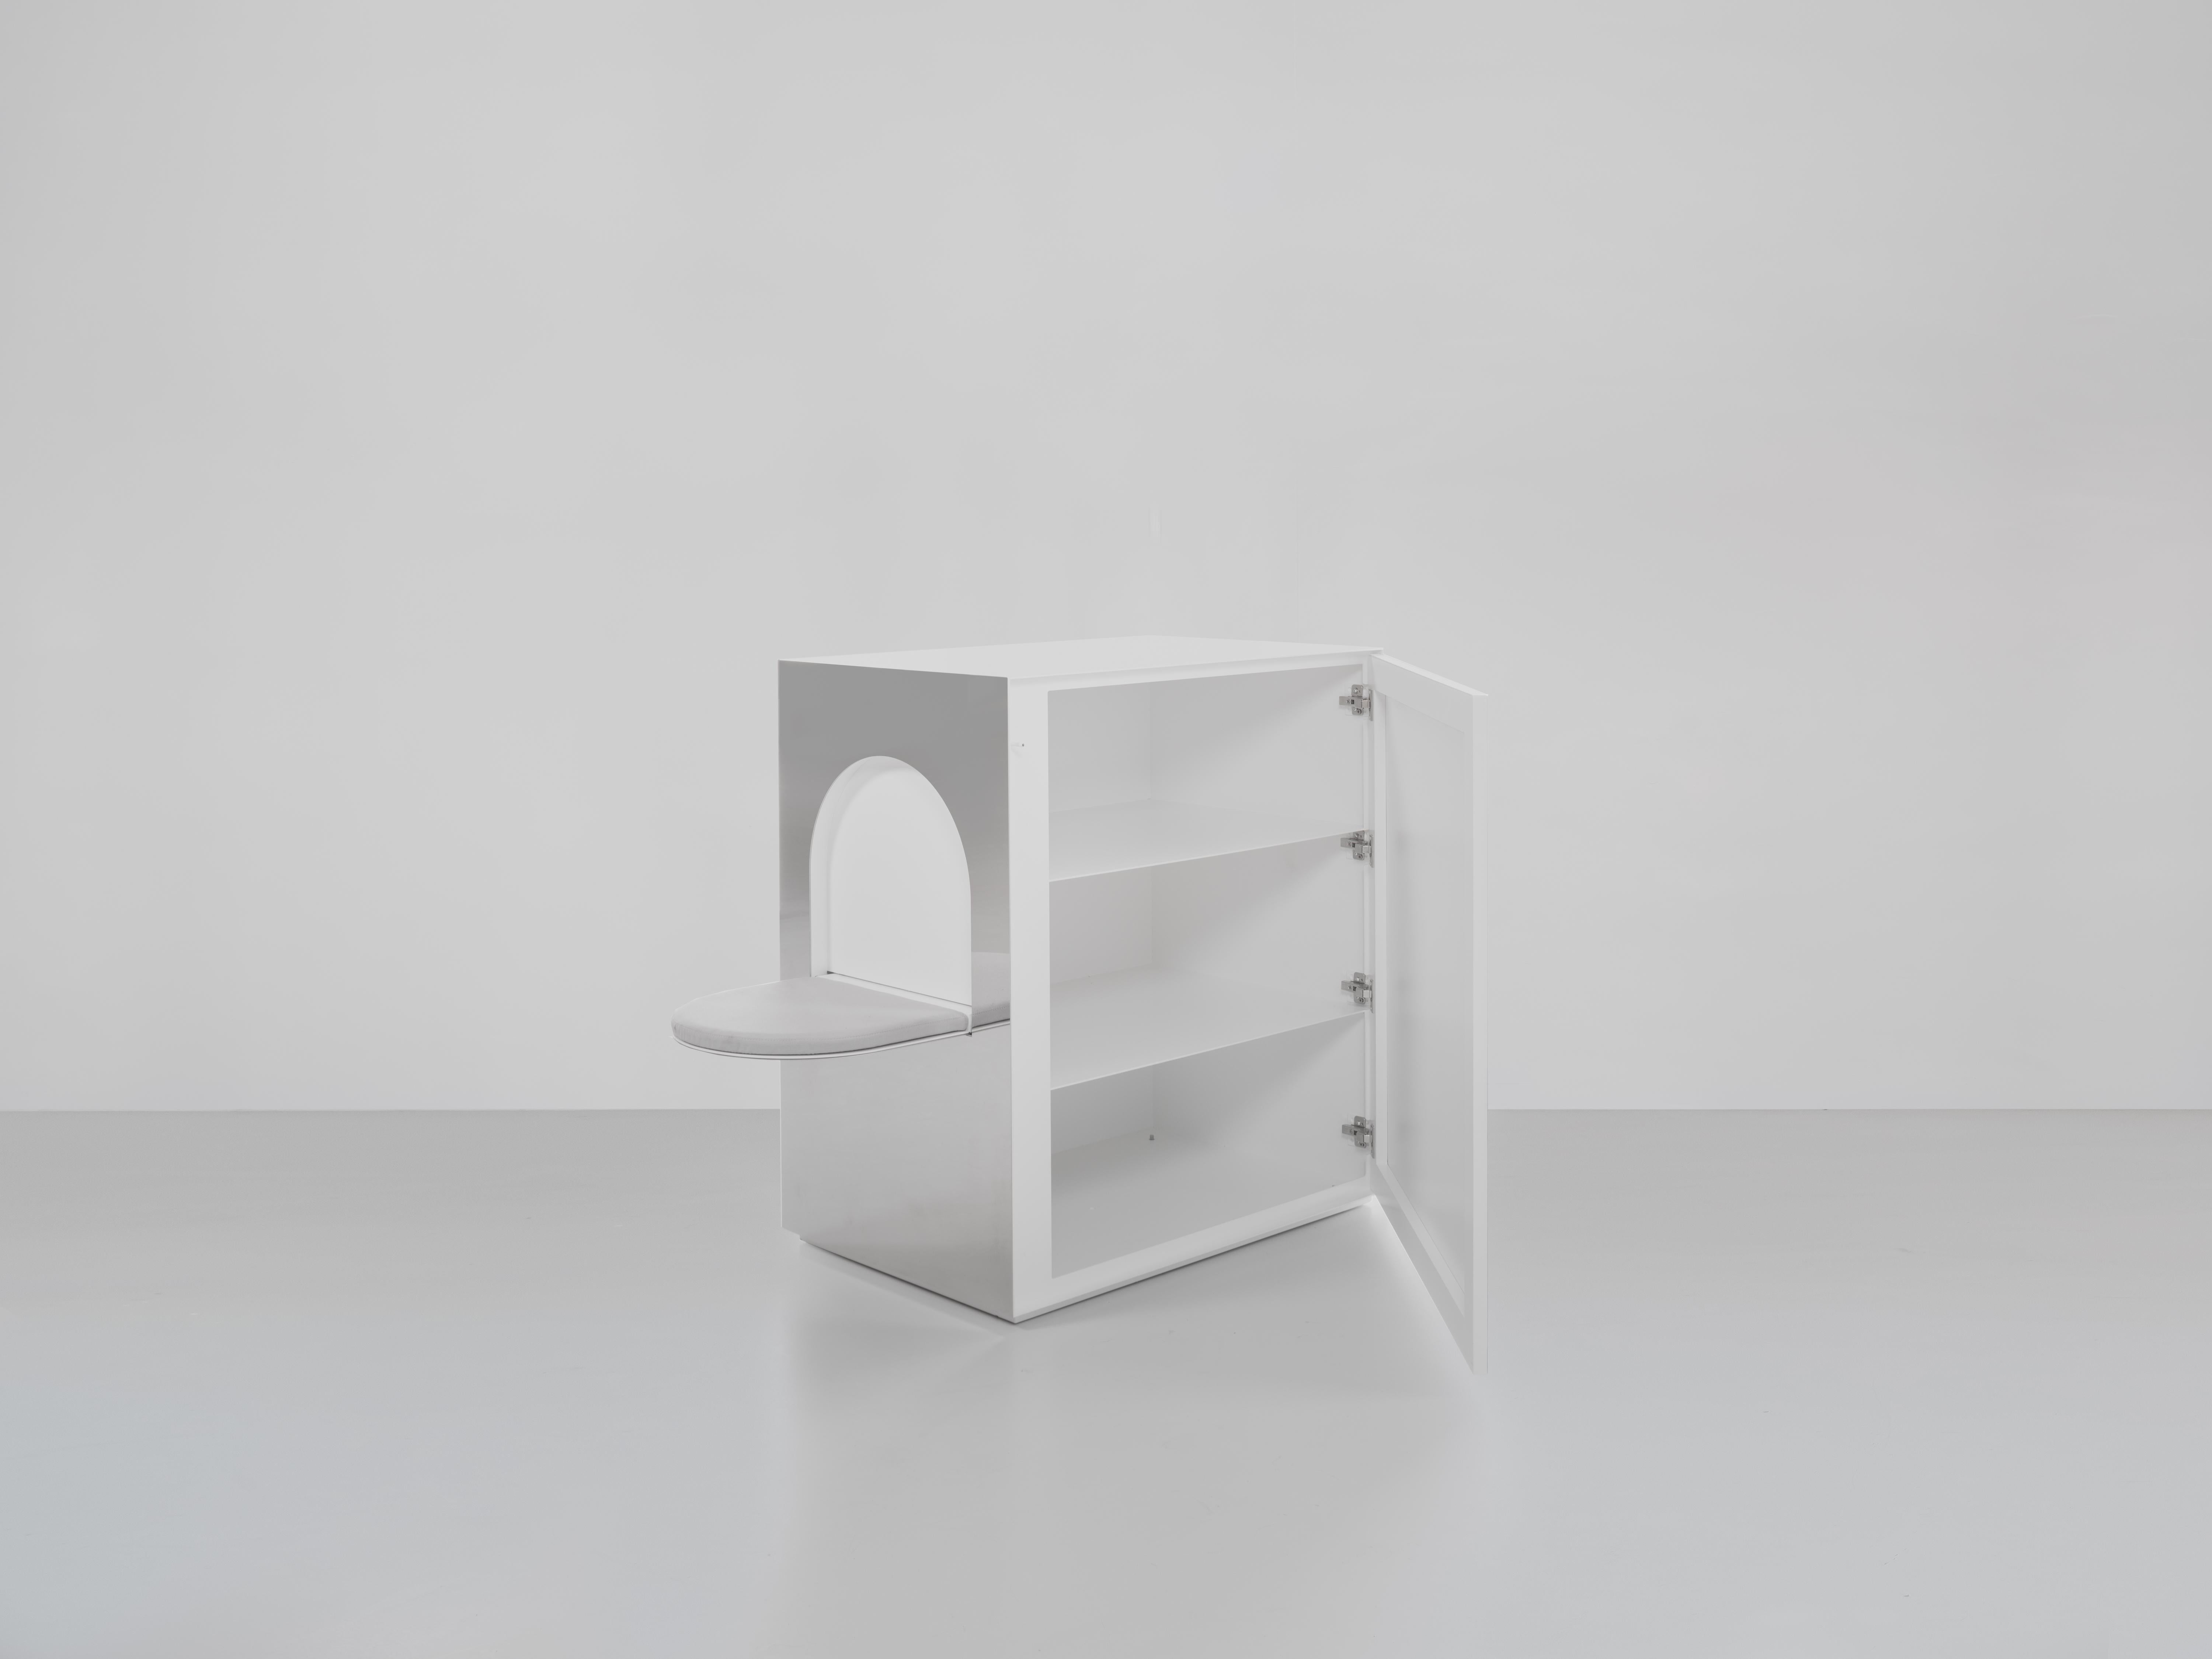 Sam Chermayeff
Buffet seat
From the series “Beasts”
Produced in exclusive for SIDE GALLERY
Manufactured by ERTL und ZULL
Berlin, 2021
White powder-coated steel, mirror, upholstery
Contemporary Design

Measurements
90 cm x 60 cm x 100h cm